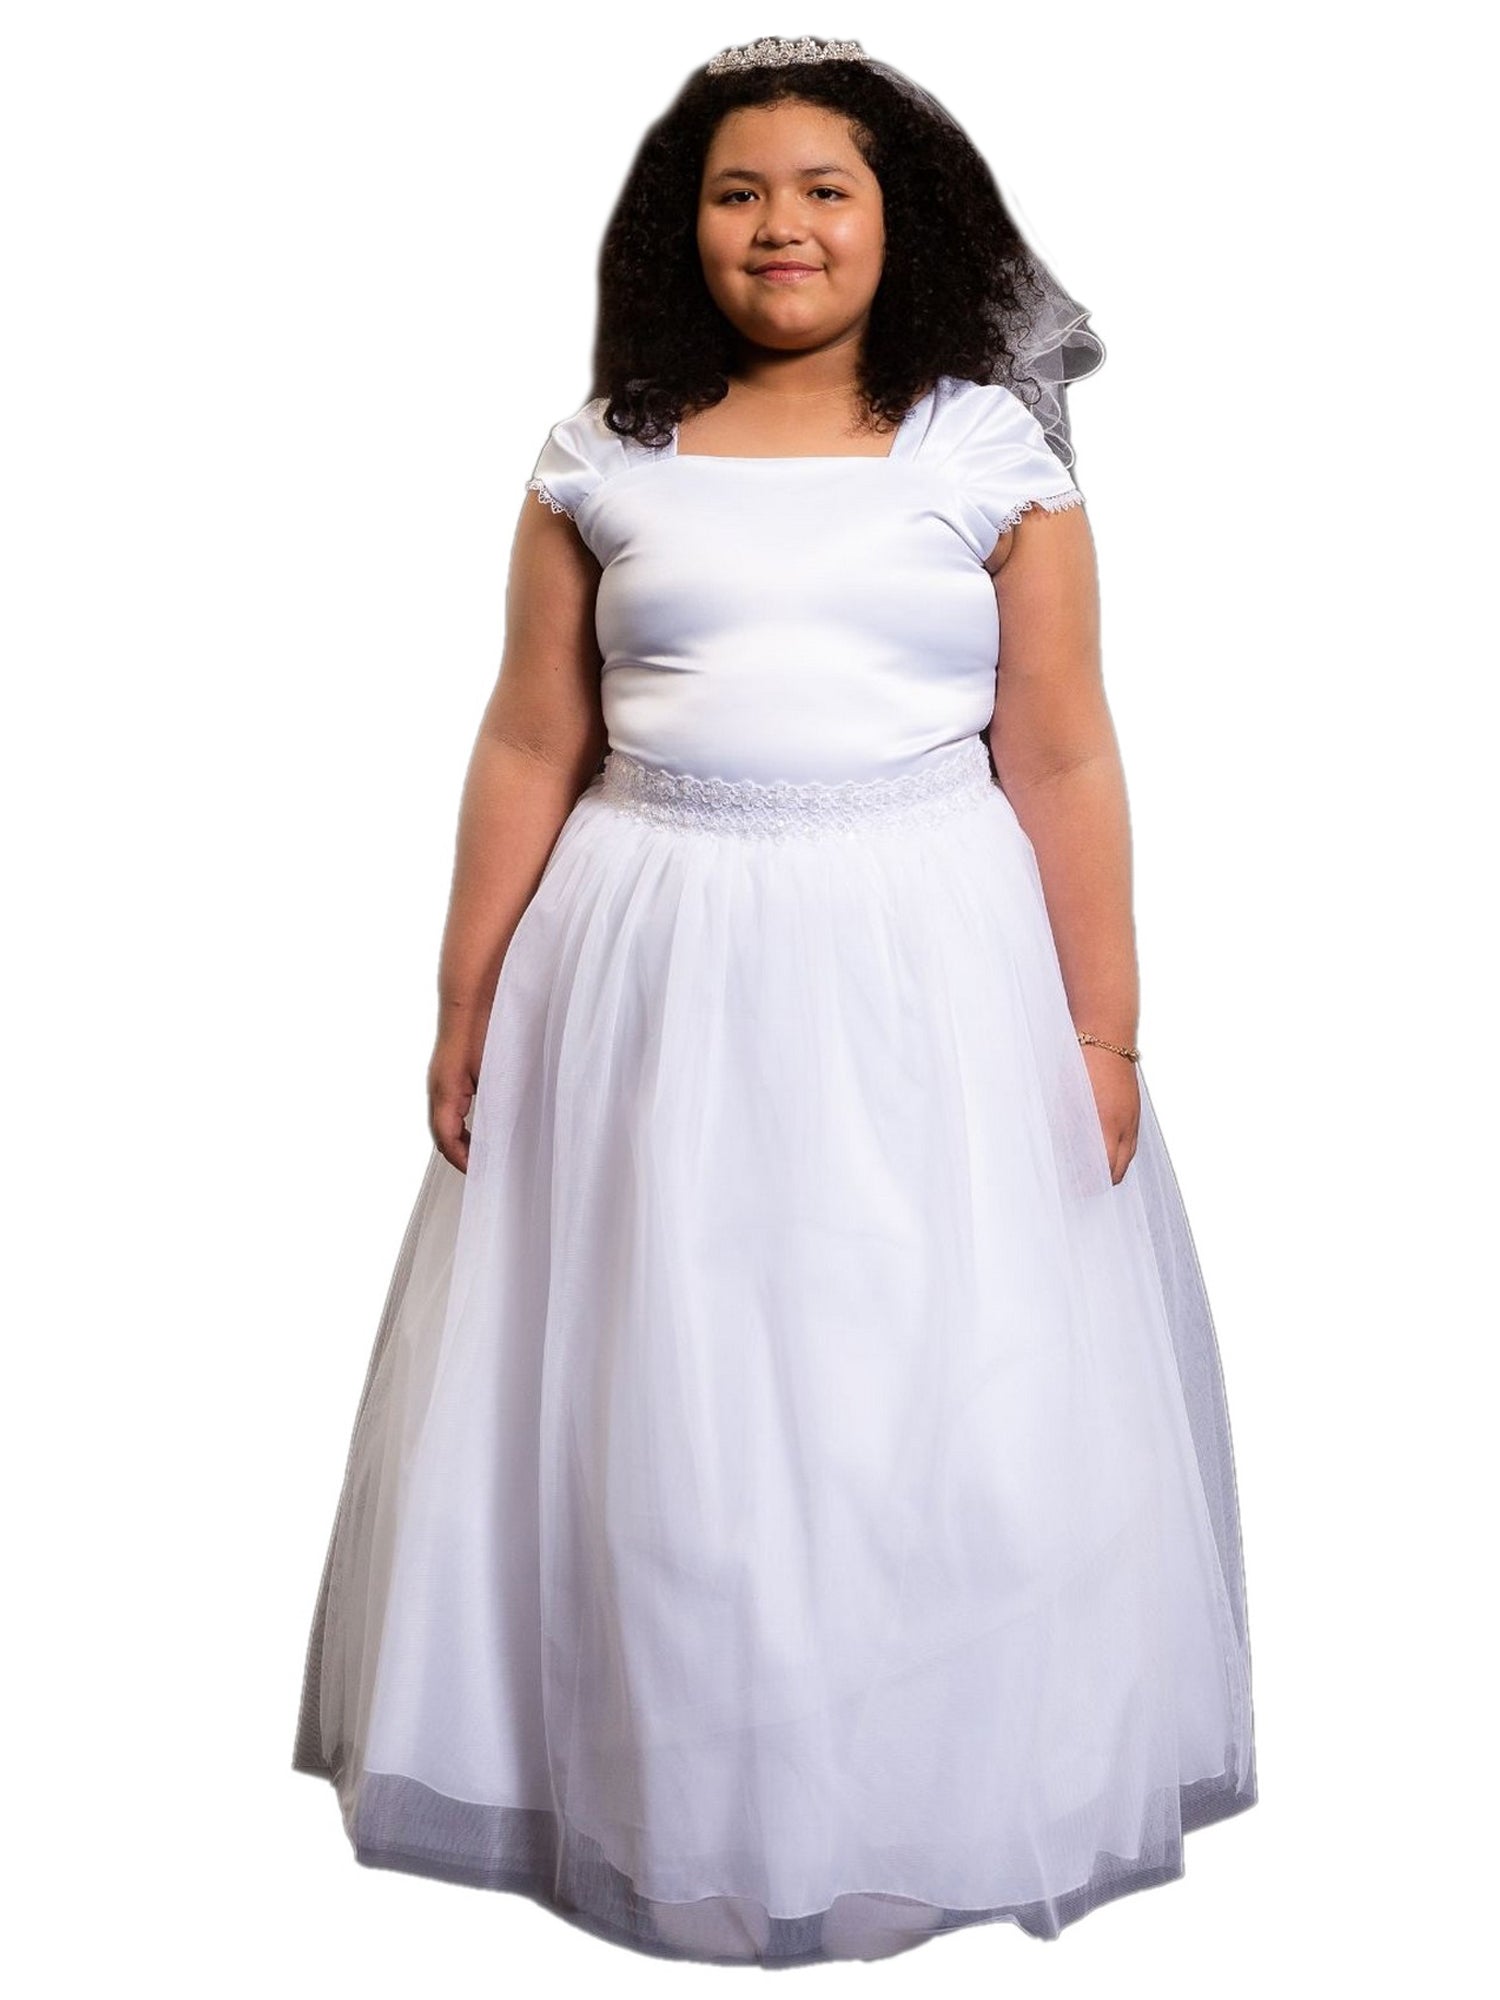 Girls' Plus Size Clothes: Cute Kids' Clothing Sizes 10 to 20